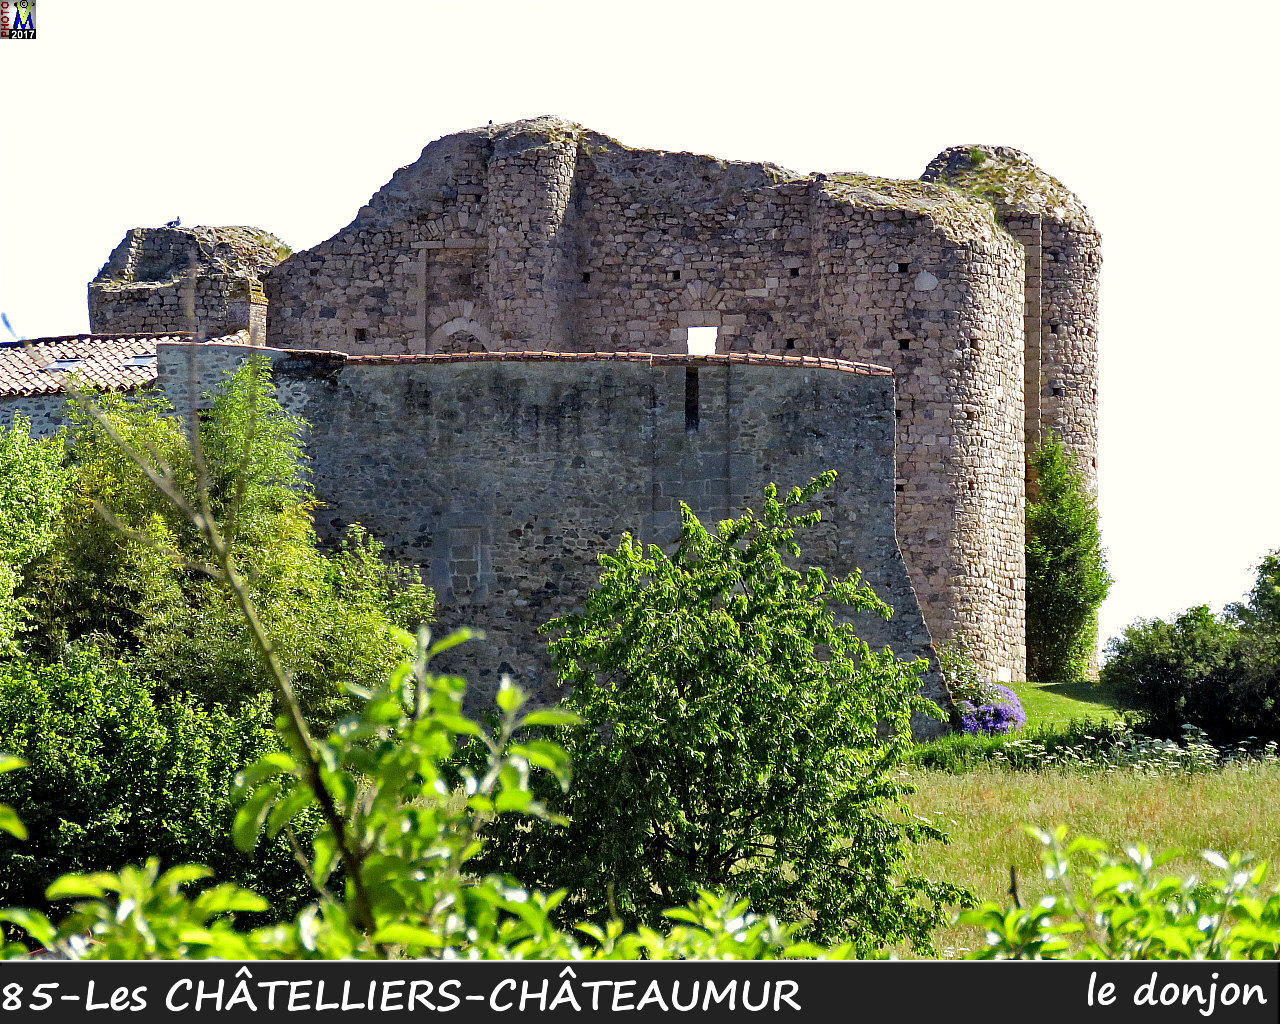 85CHATELLIERS-CHATEAUMUR_chateau_1006.jpg